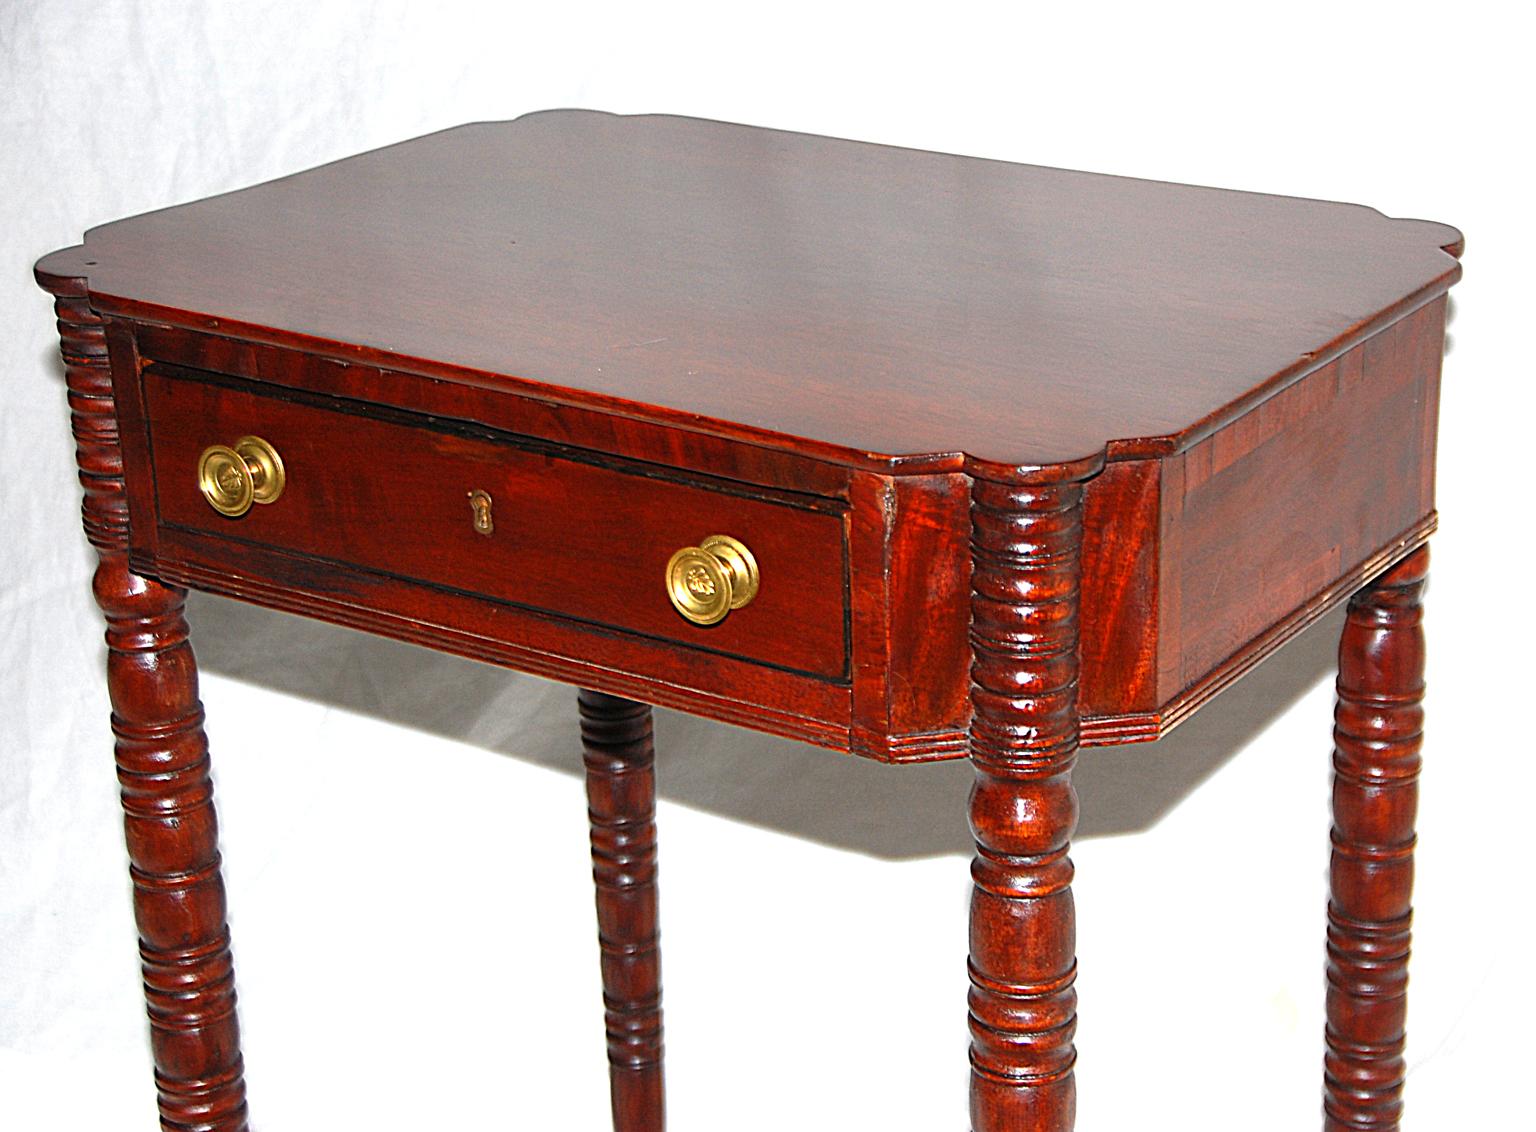 American Sheraton period one-drawer workstand in mahogany. The tapered ring turned legs with turret tops are unusual and indicate a probable Boston origin. The concave corners of the body of the stand add interest and architectural dimension to this